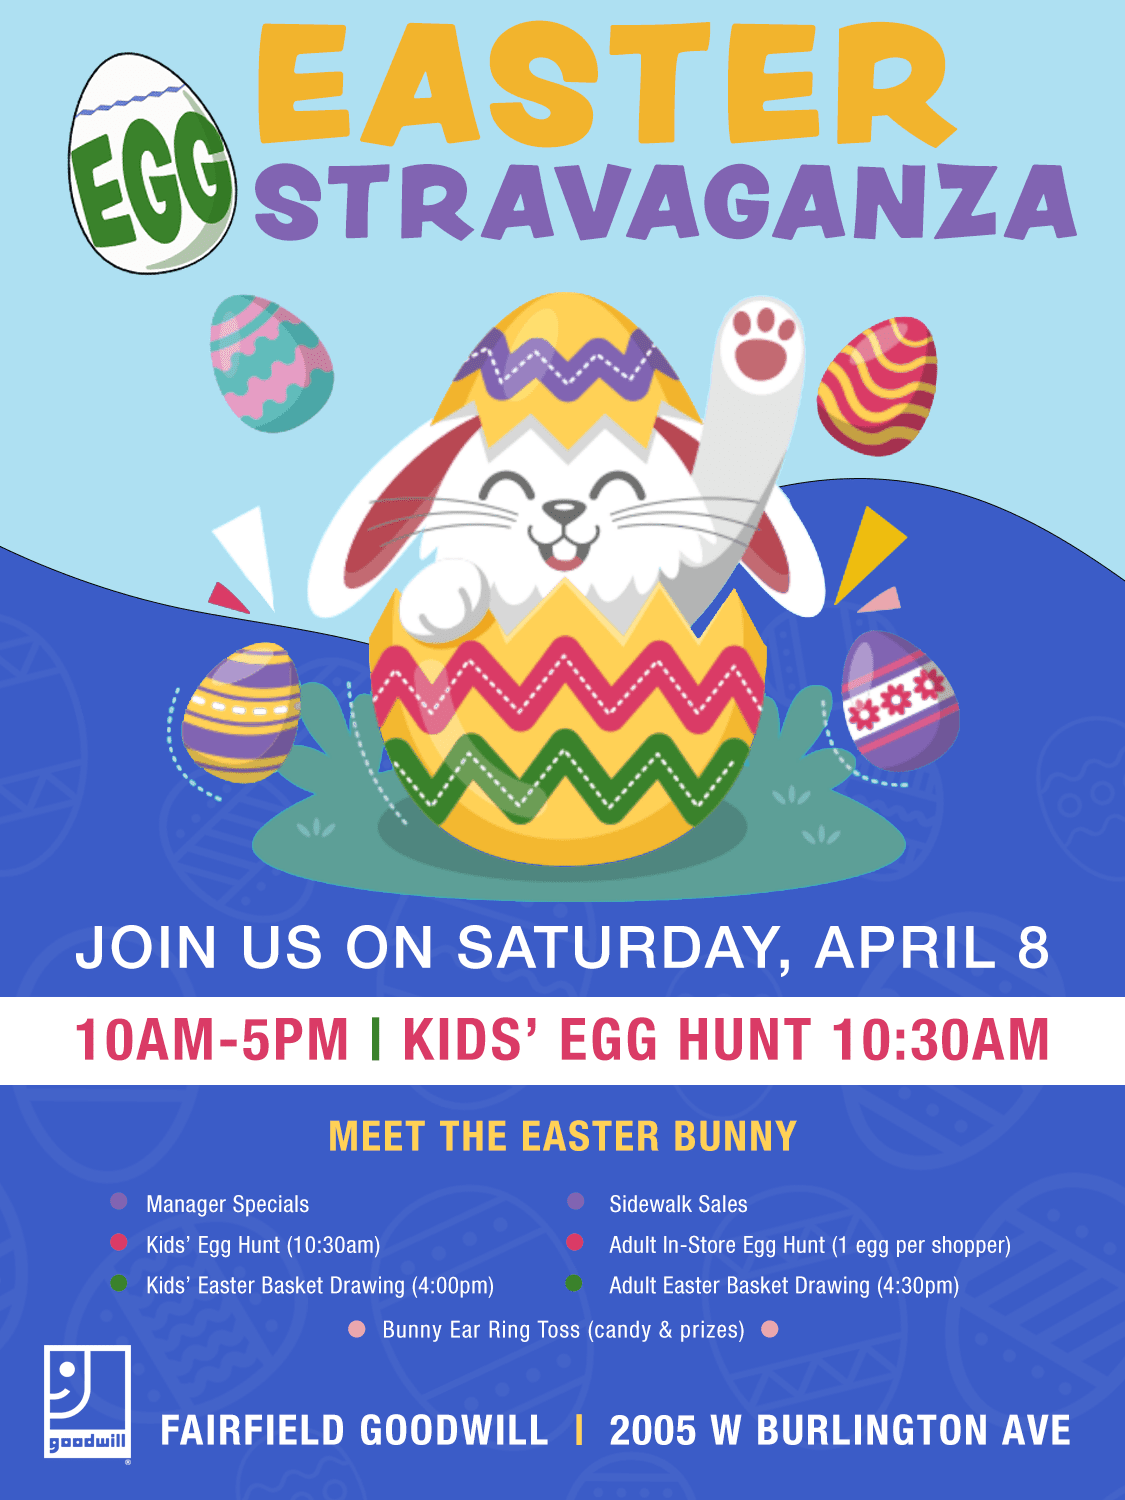 Be at the Fairfield Goodwill Store on Saturday, April 8, to participate in the team's annual Easter Egg-Stravaganza, featuring egg hunts, the Easter Bunny, specials, prizes and more!